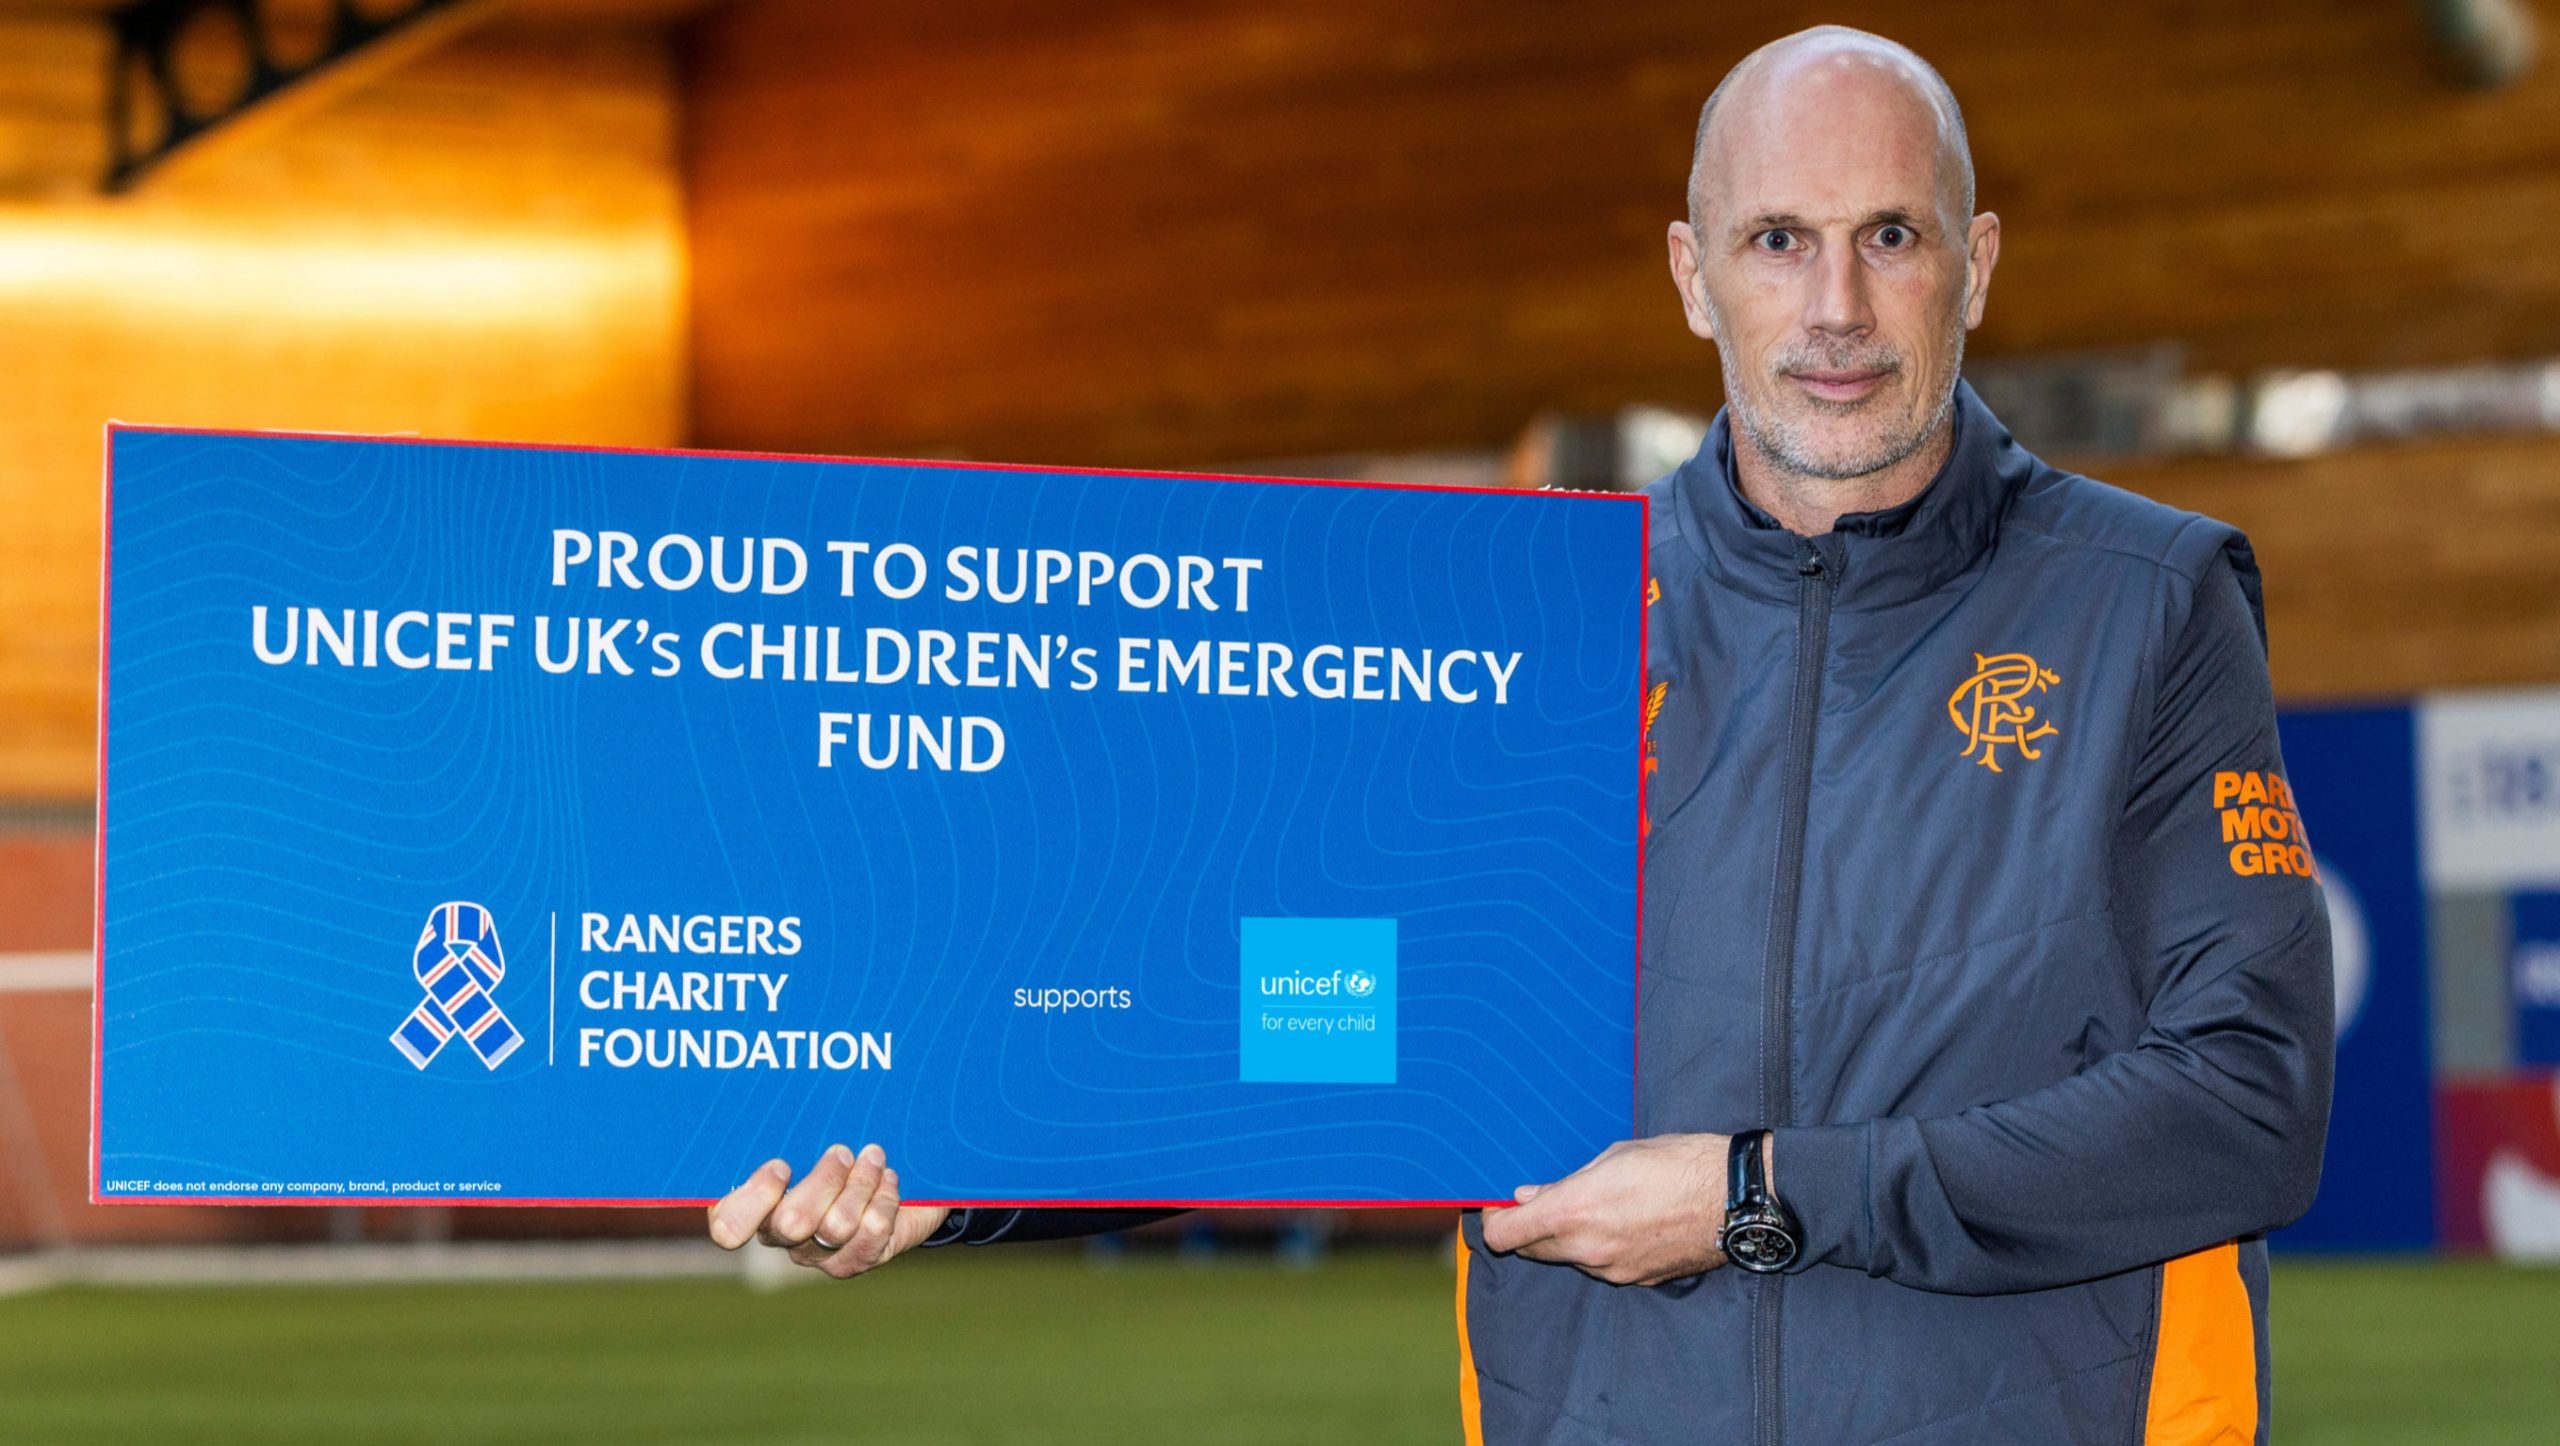 Rangers Charity Foundation announces donation to UNICEF UK Children’s Emergency Fund